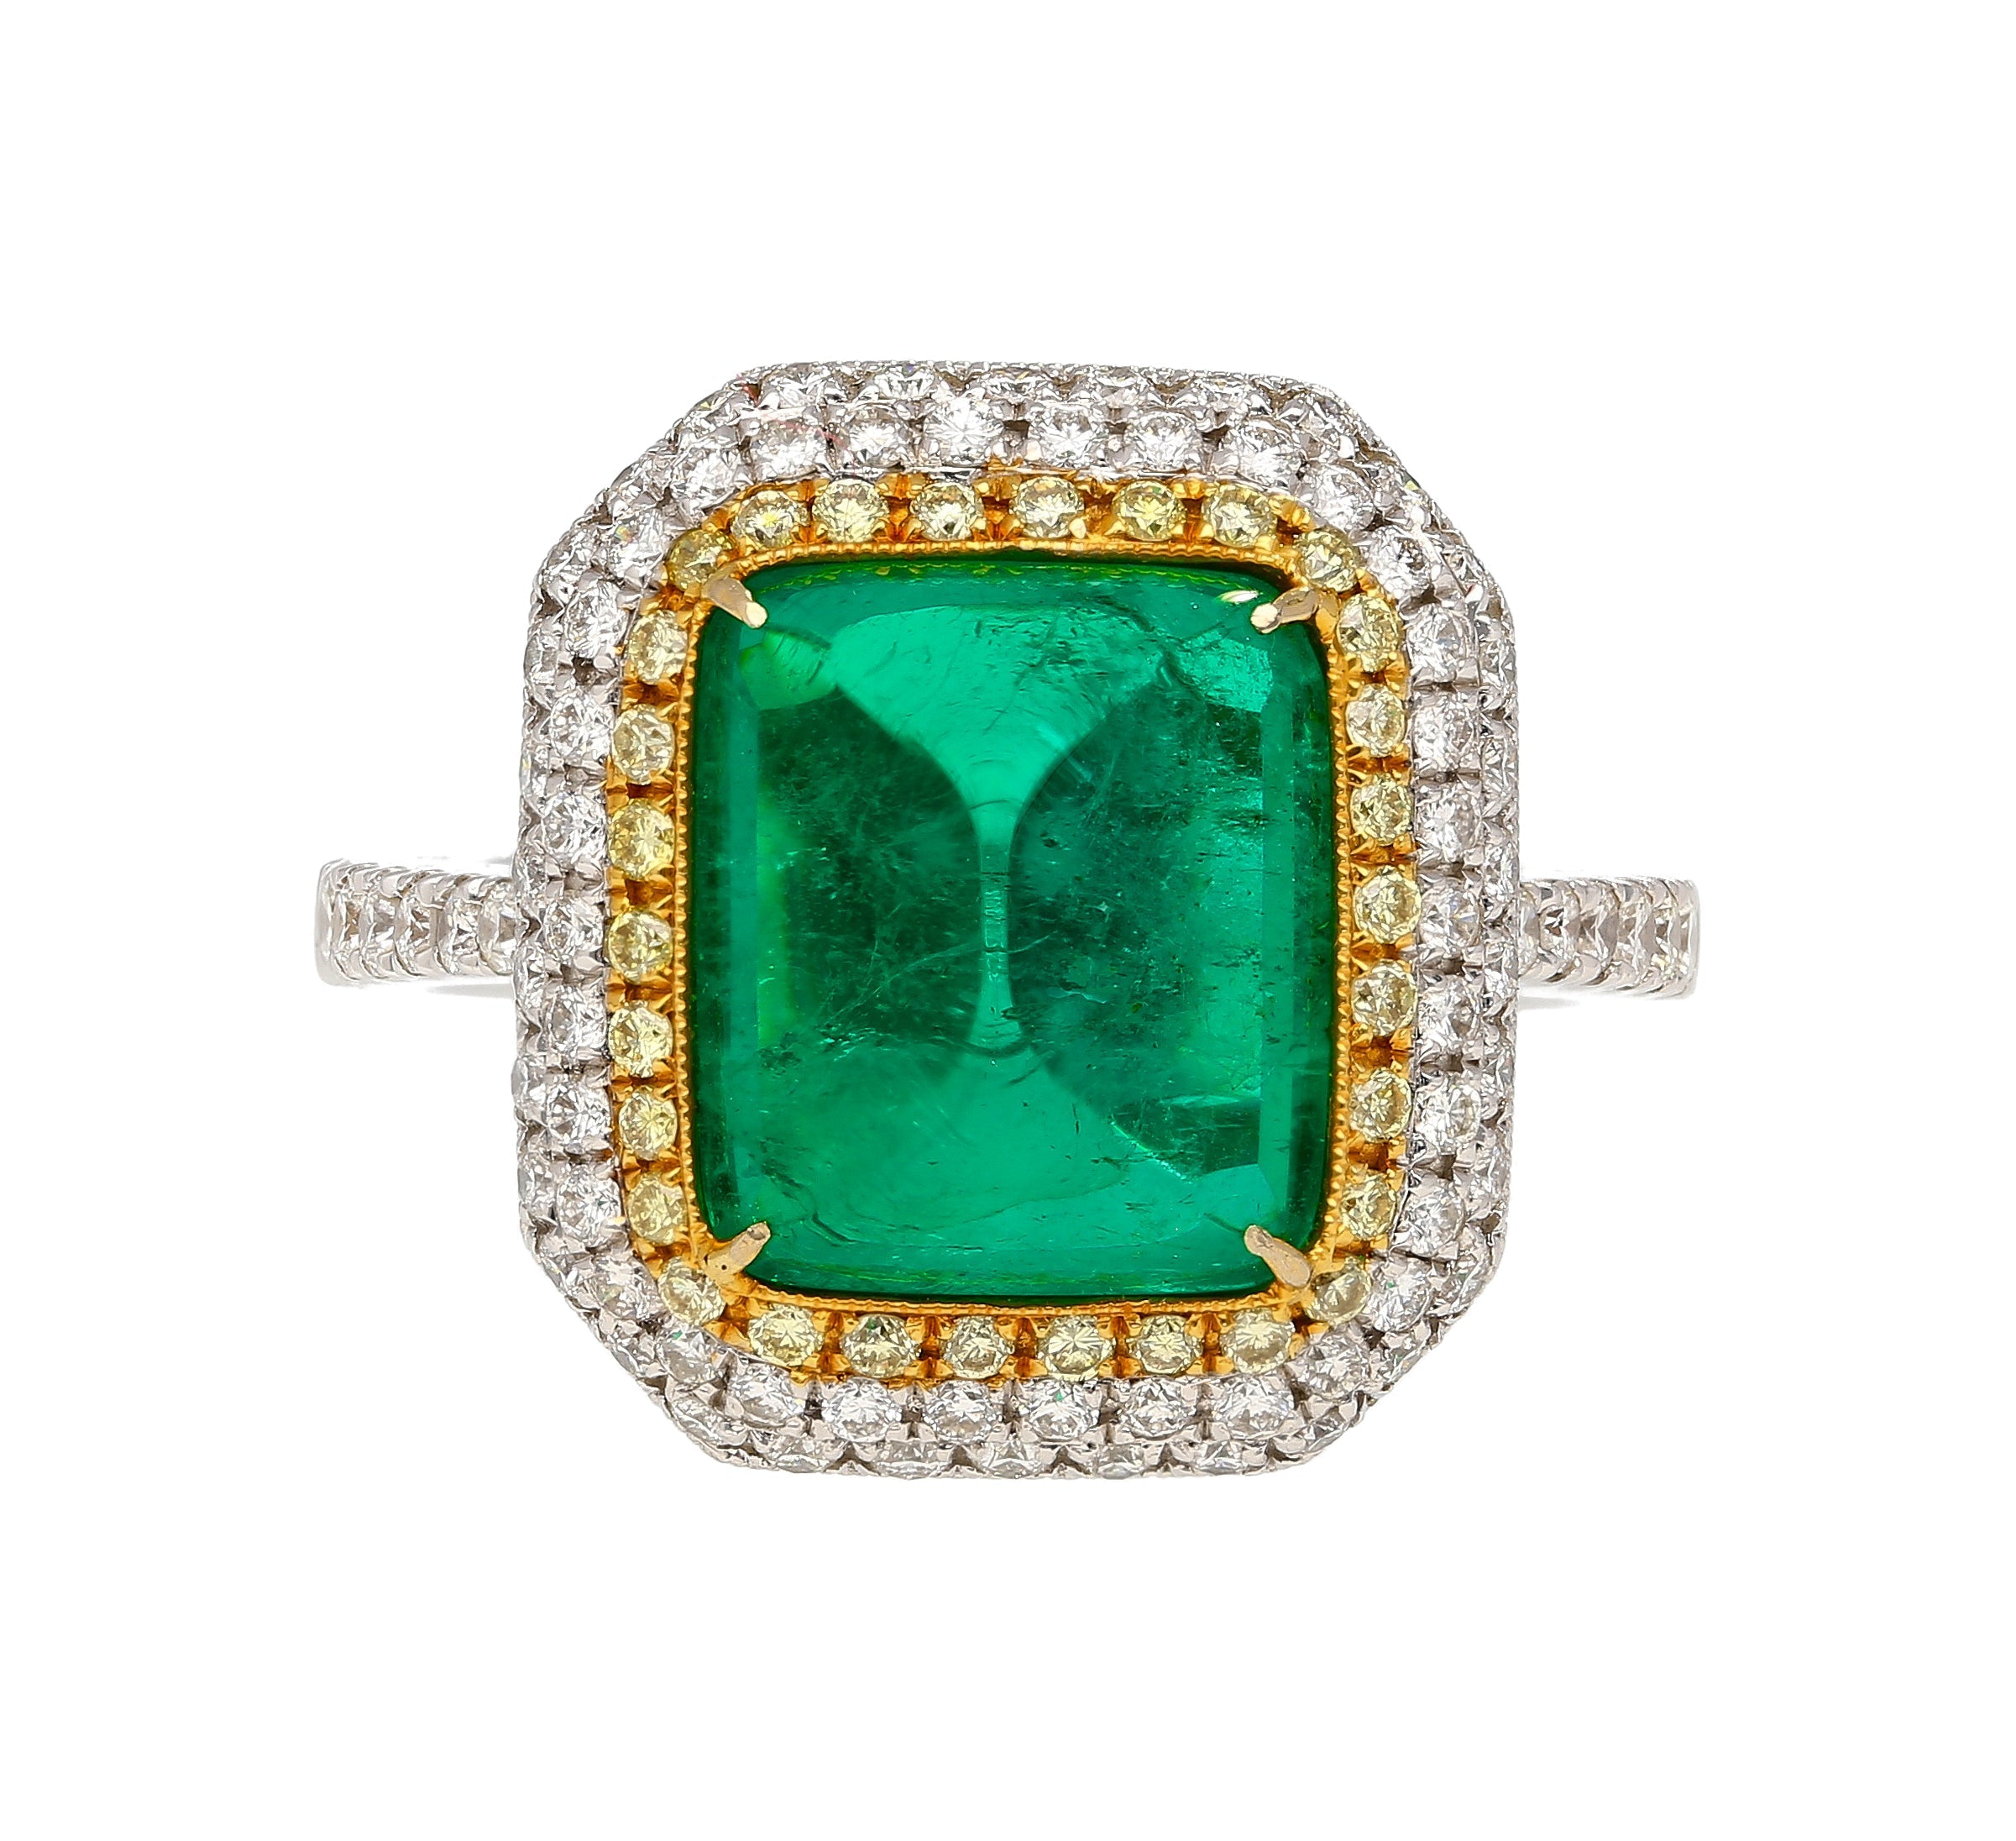 4_49-Carat-Sugarloaf-Cabochon-Cut-Colombian-Emerald-and-Diamond-Halo-Ring-in-18k-White-Gold-Rings.jpg